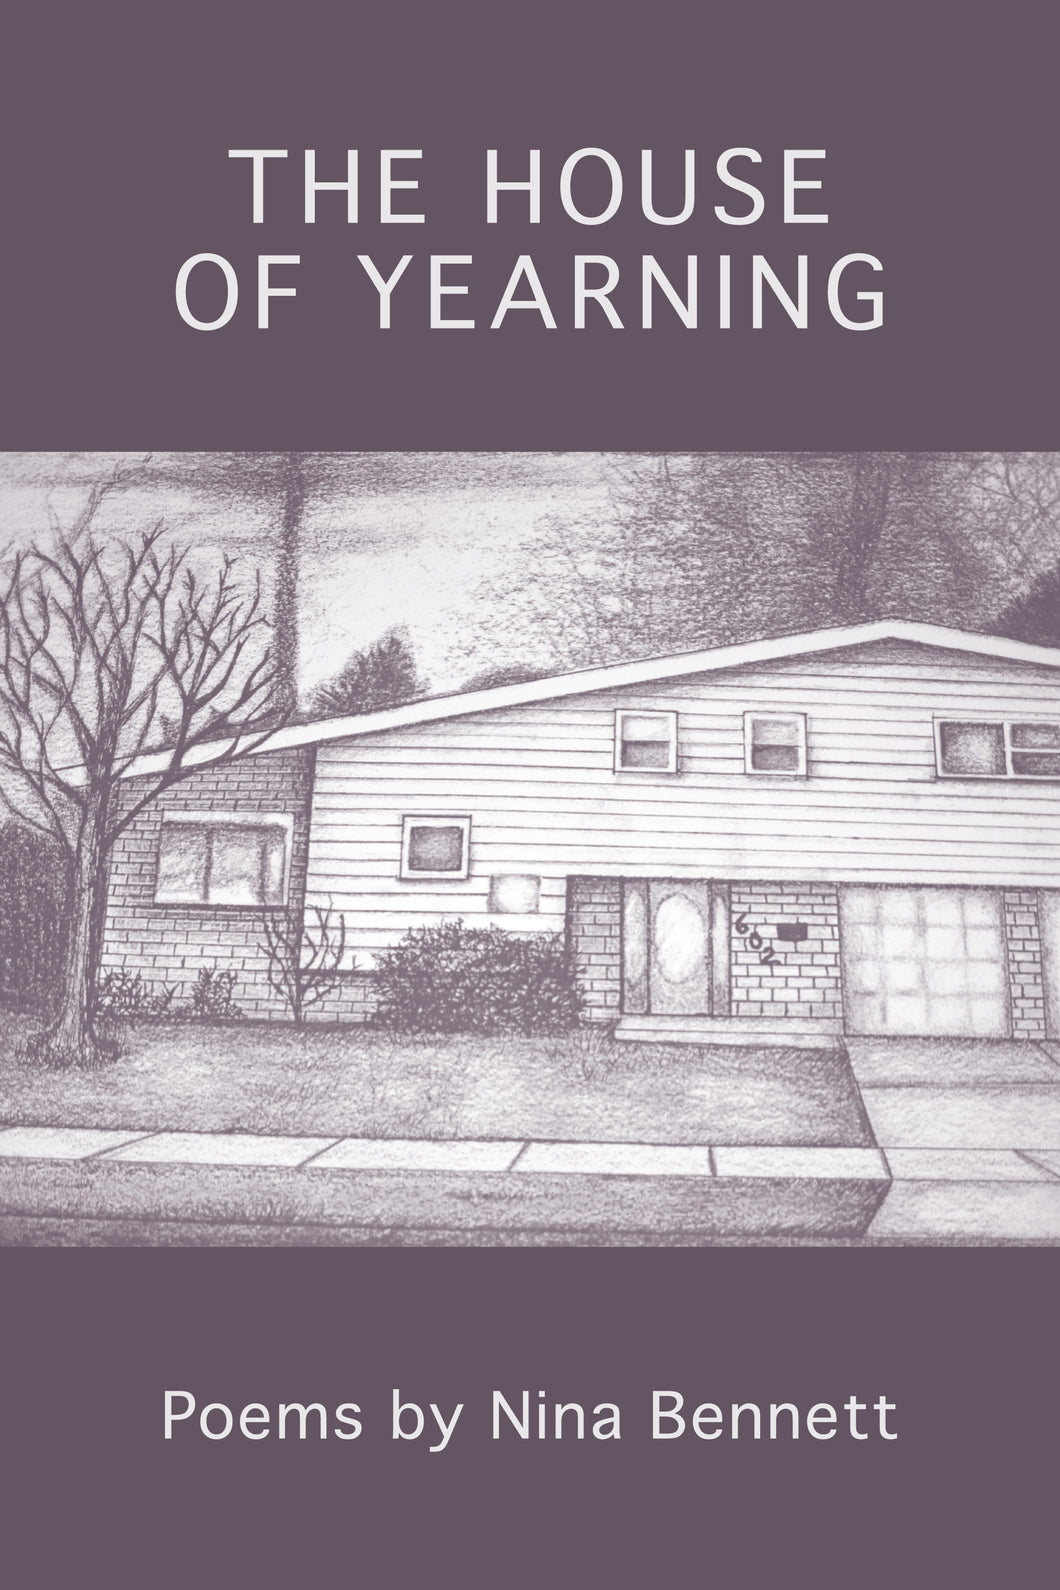 The House of Yearning